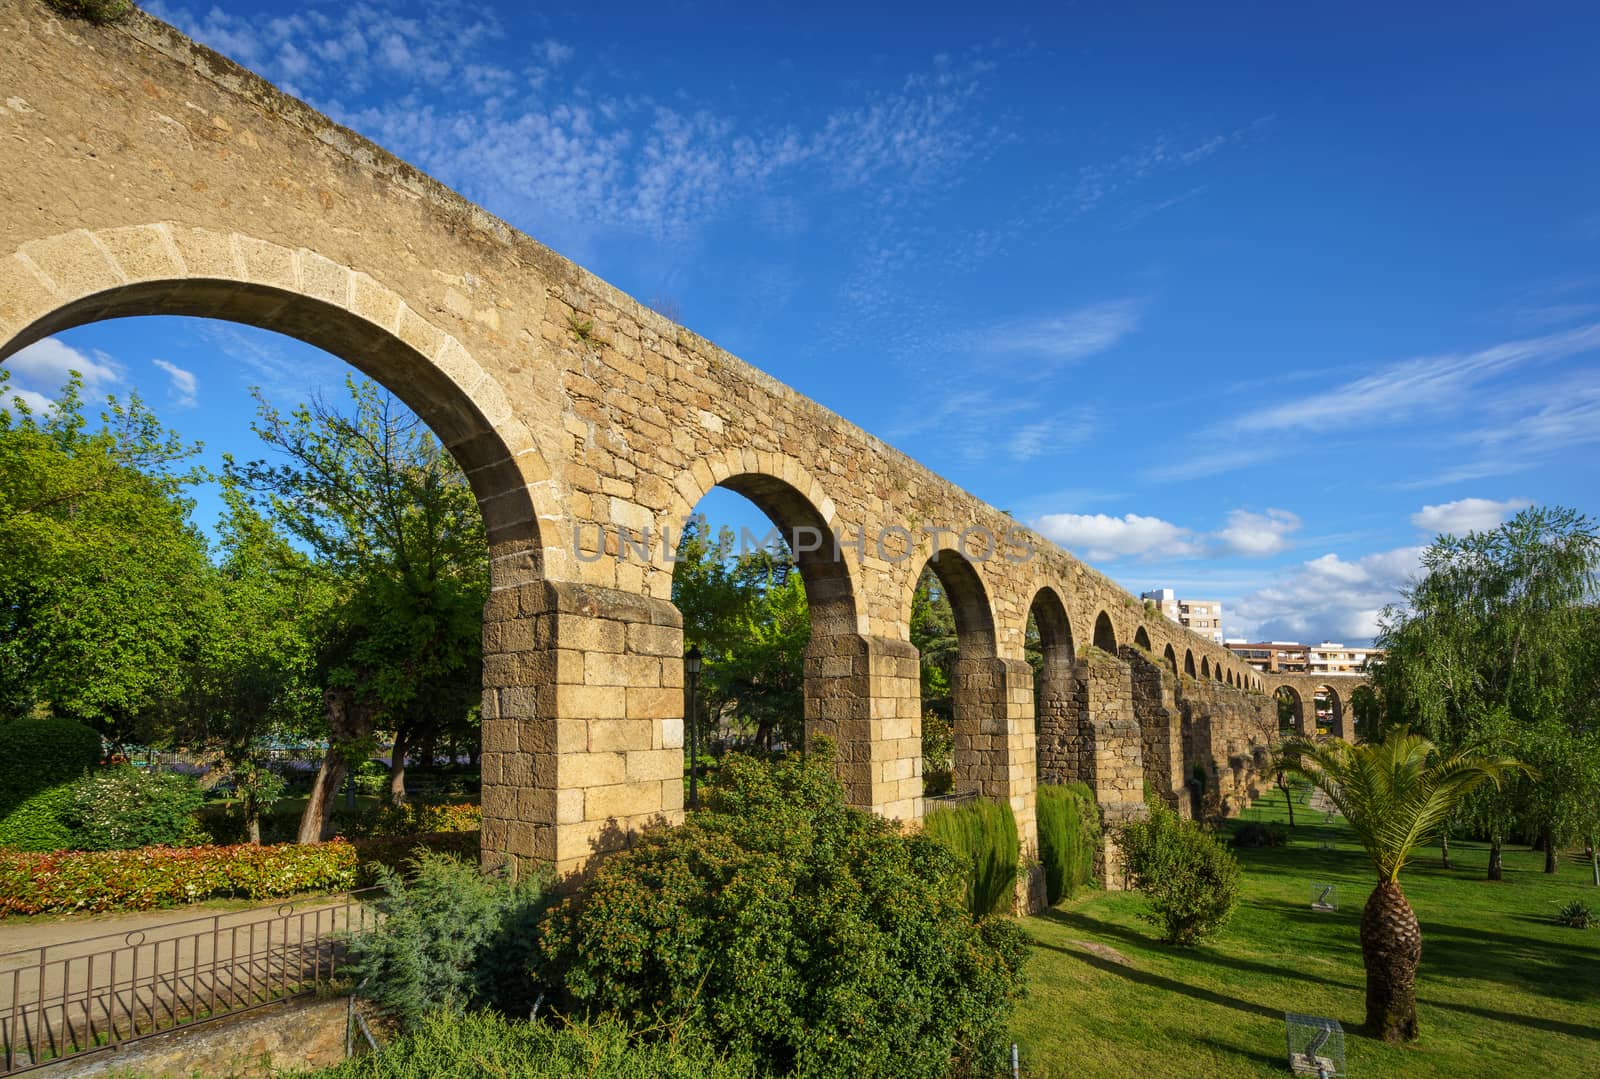 Aqueduct of San Anton in Plasencia, province of Caceres, Spain. Built on the 16th century.